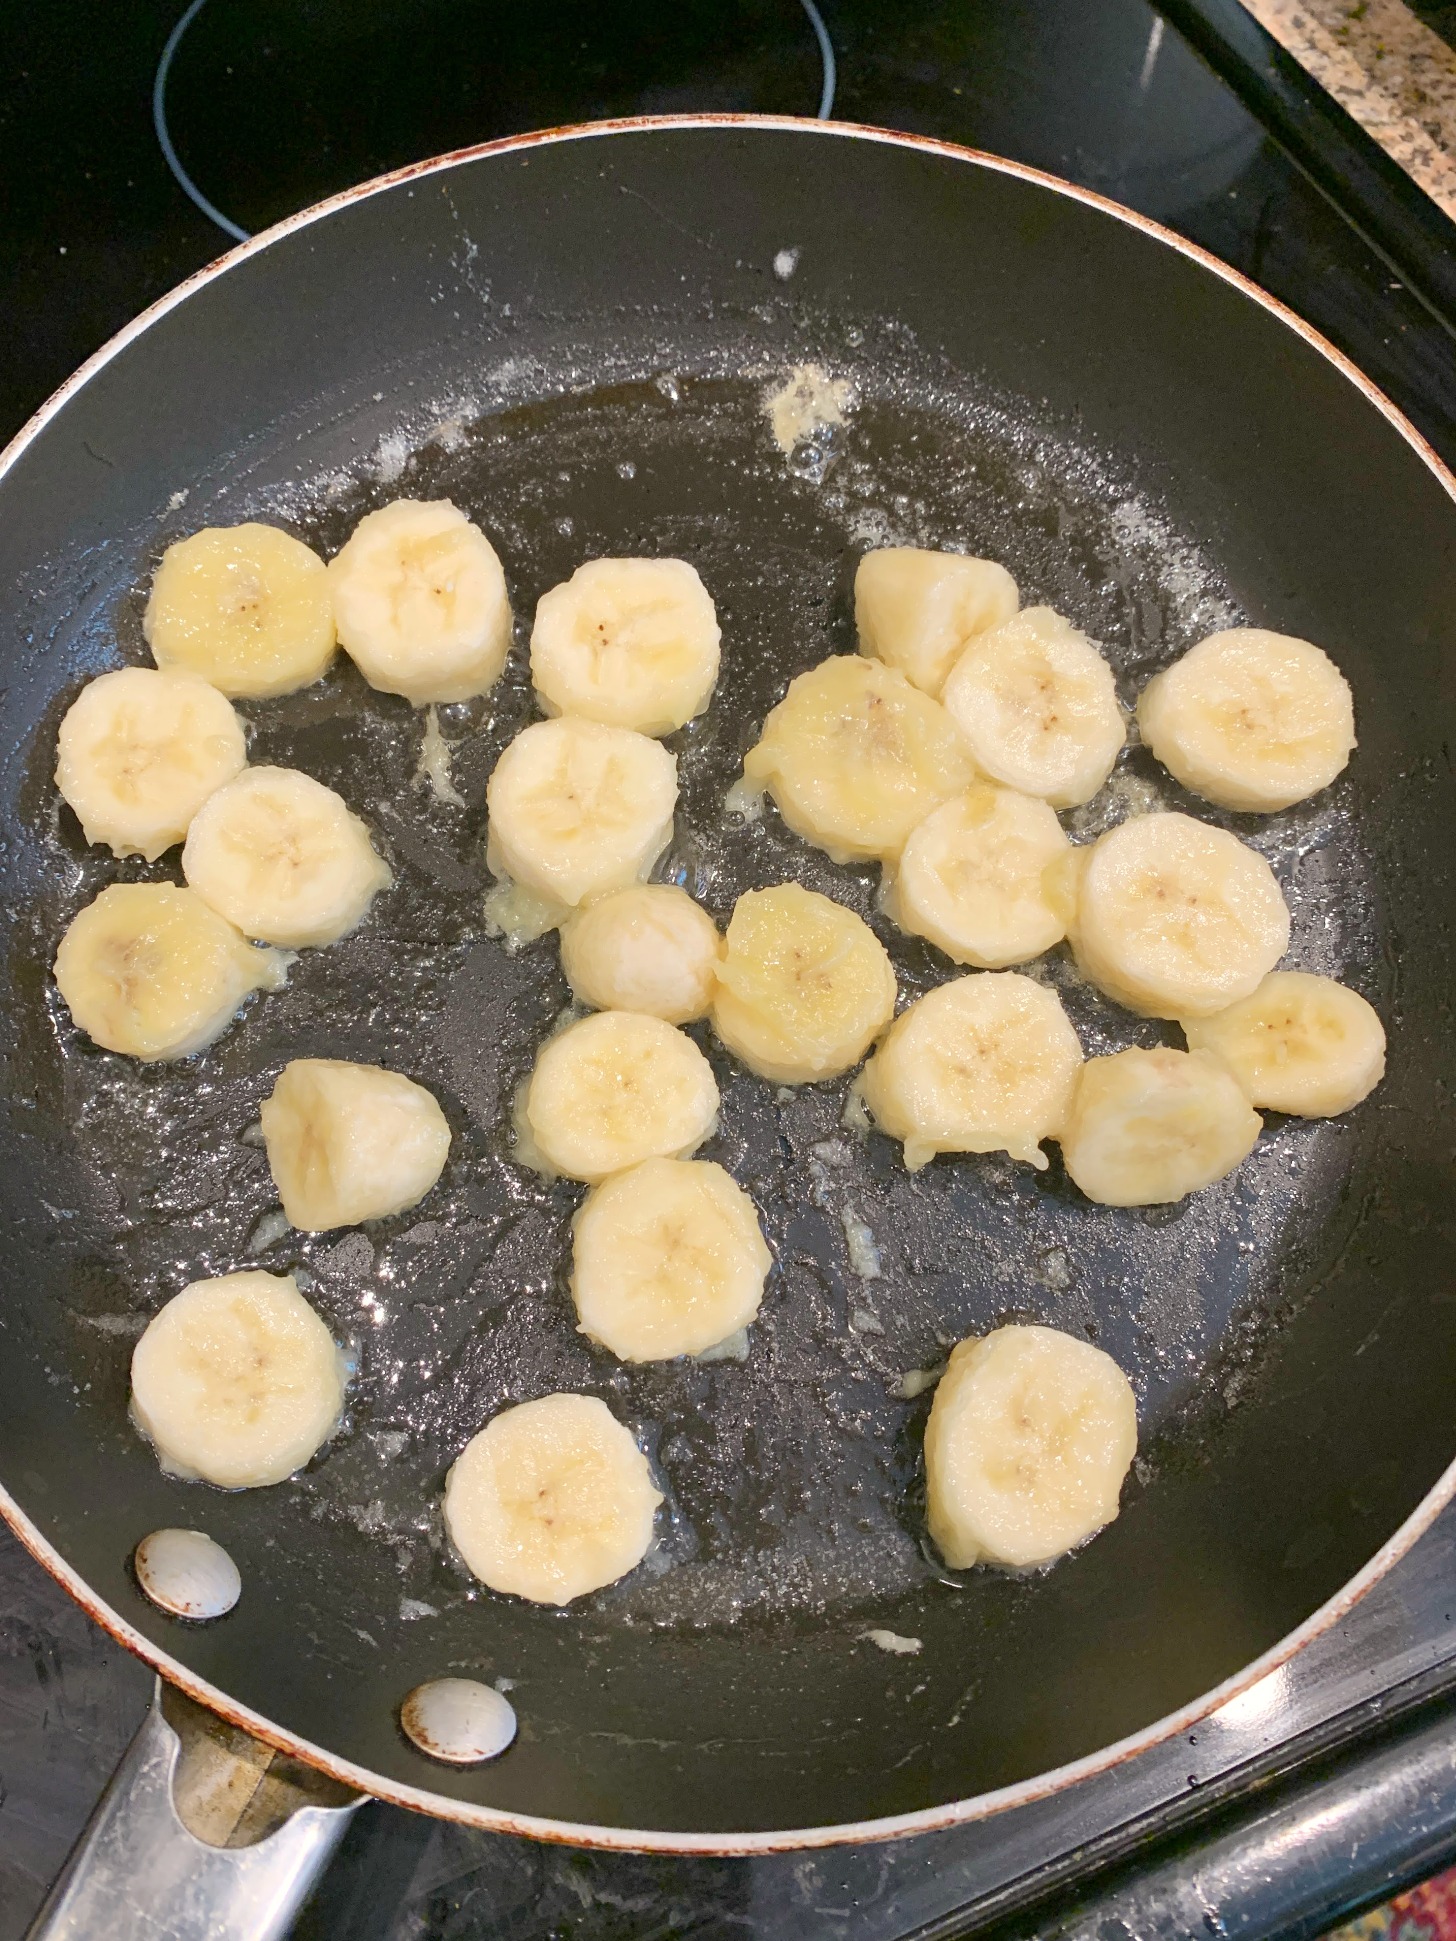 banana slices in a frying pan